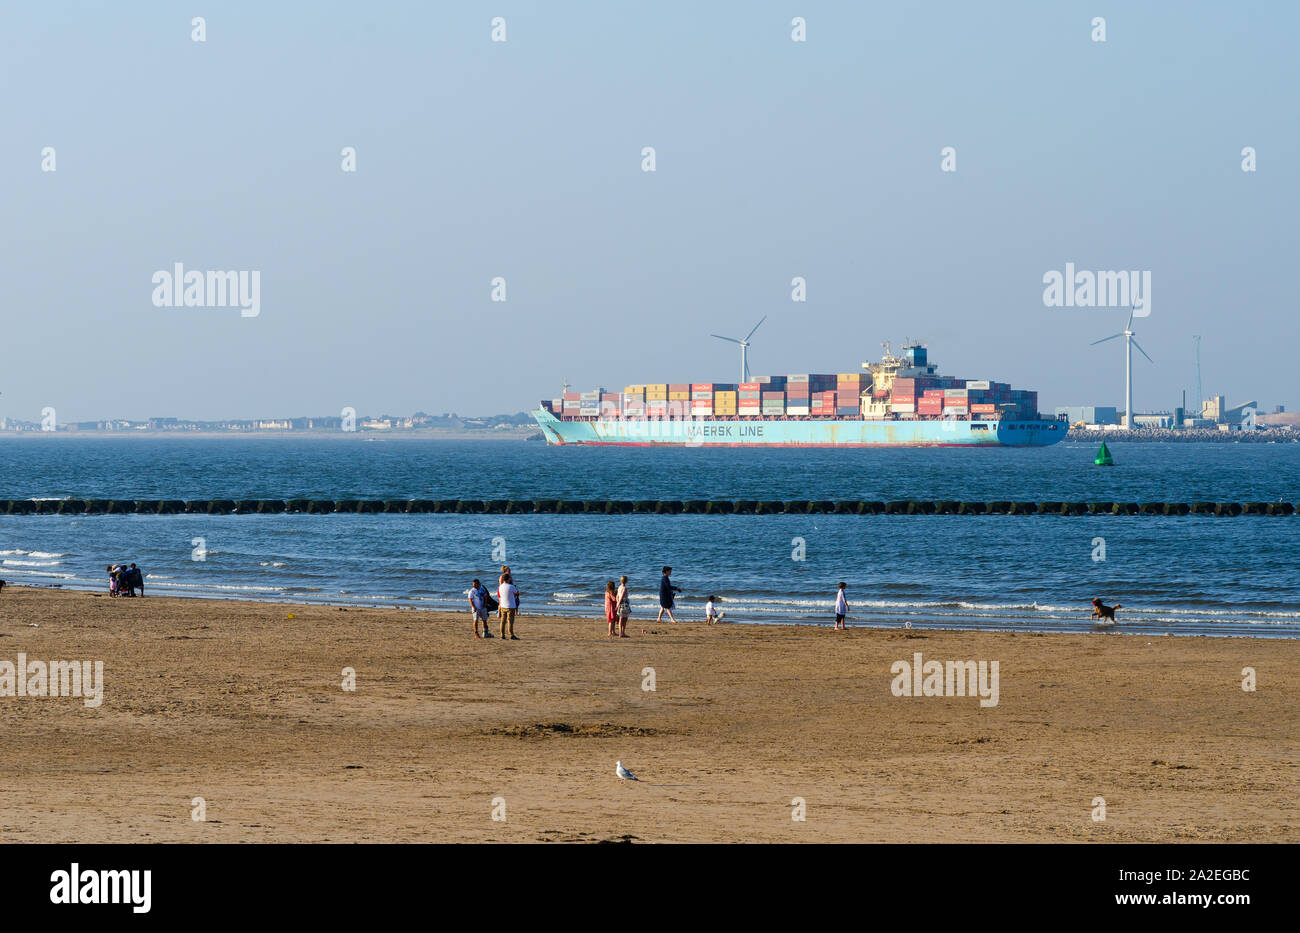 People walking on the beach on the Mersey river. 'Maersk Line' cargo ship loaded with containers is leaving Liverpool port. Stock Photo